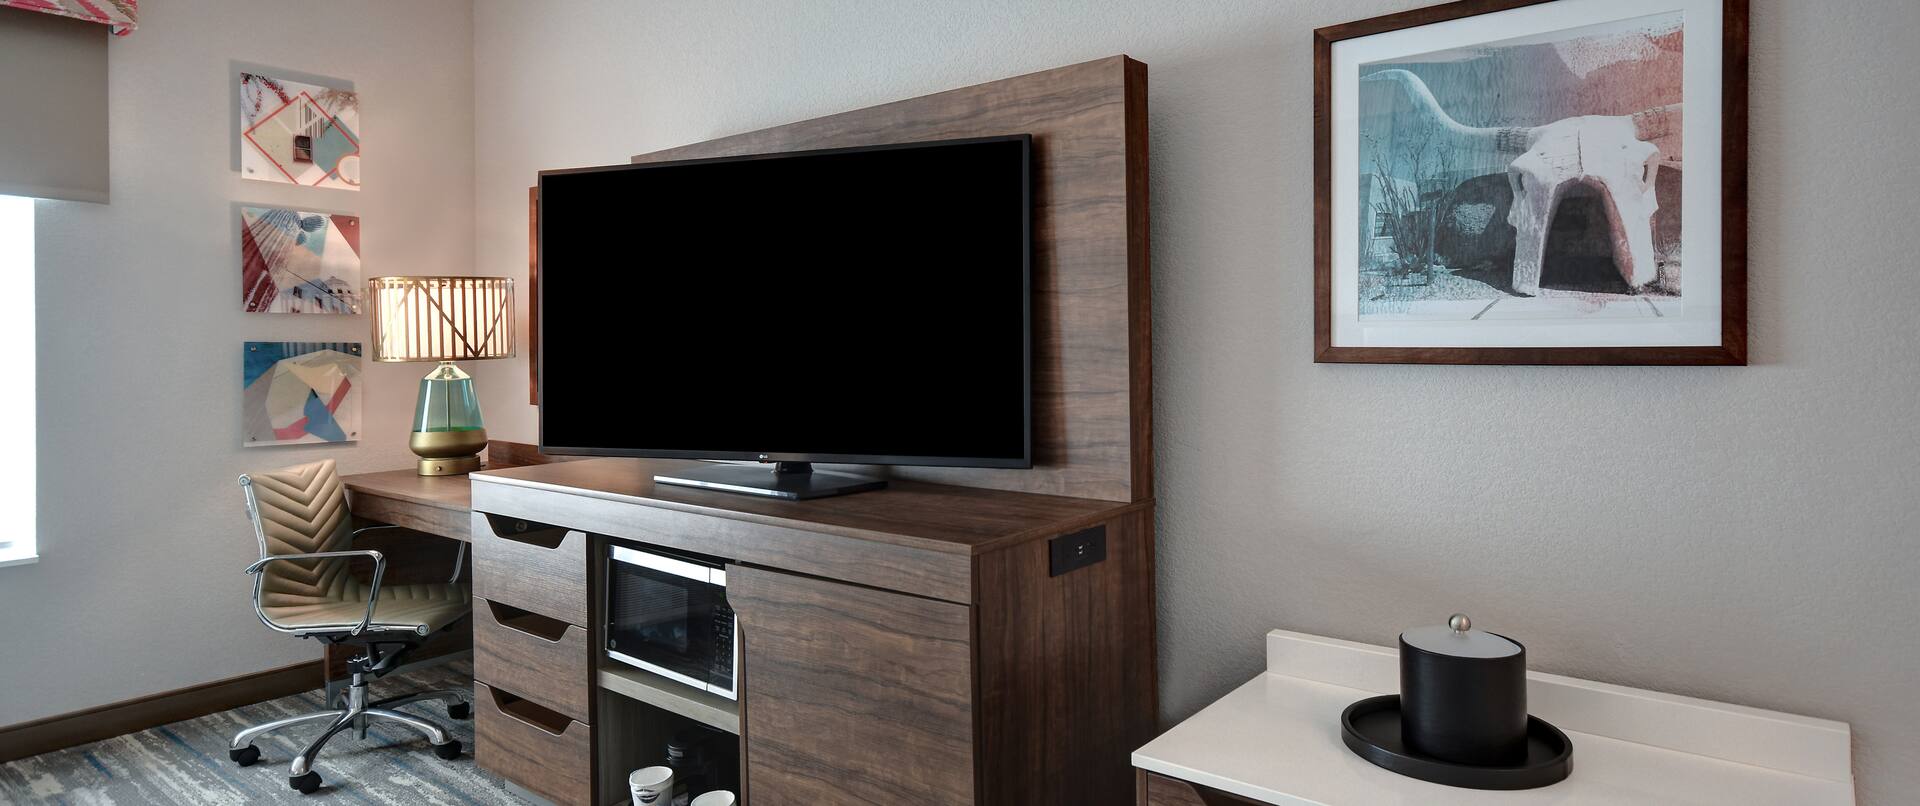 guest room with television and work desk